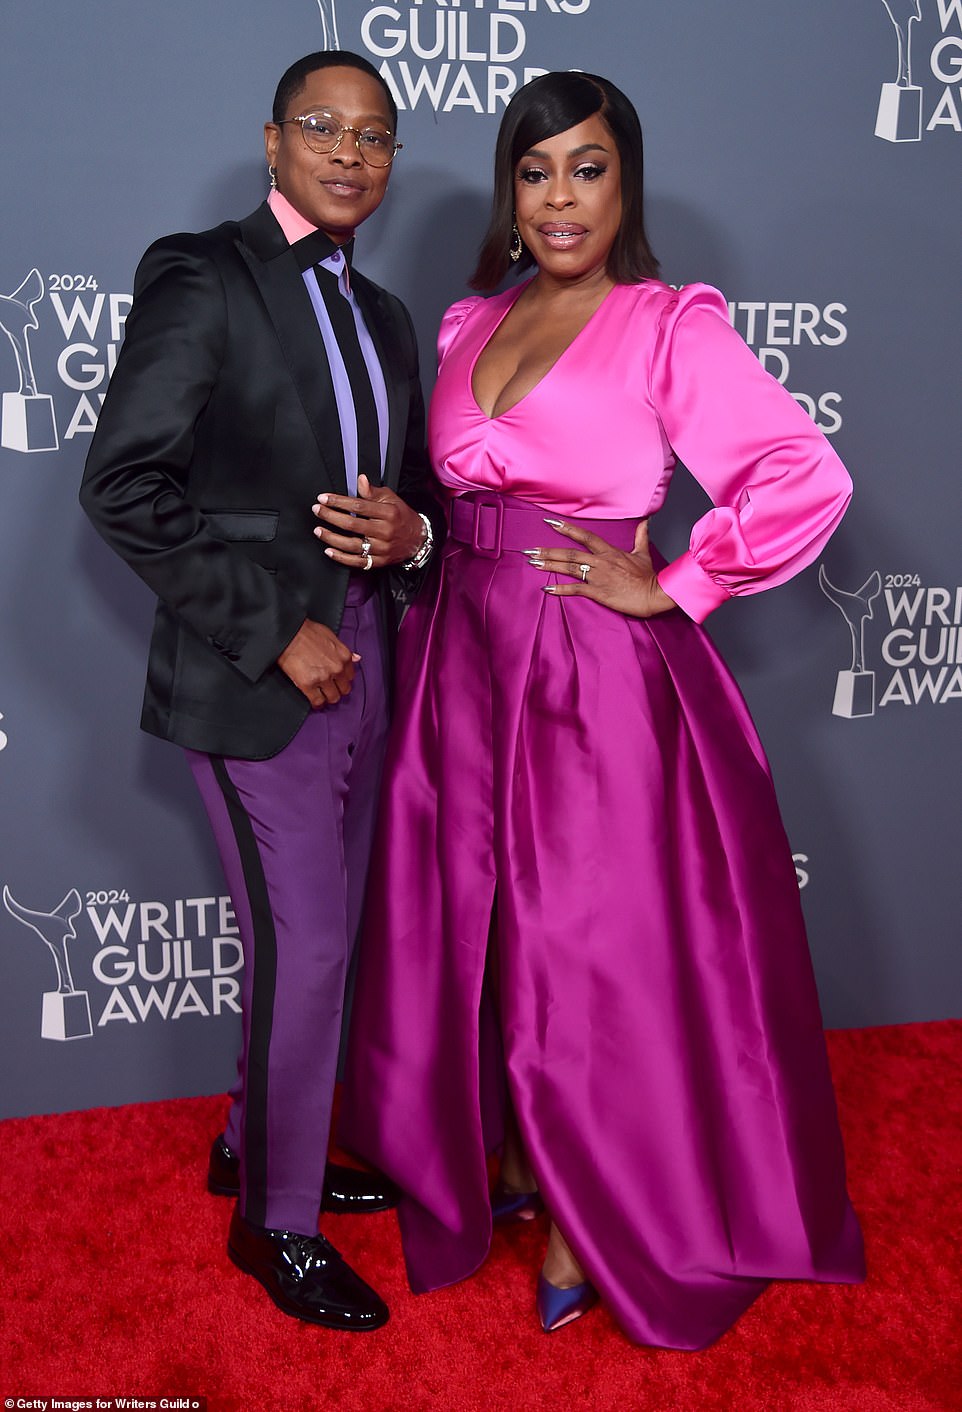 Accompanied by her wife Jessica Betts, Niecy exuded movie star glamor in a stunning outfit embellished with two-tone colors.